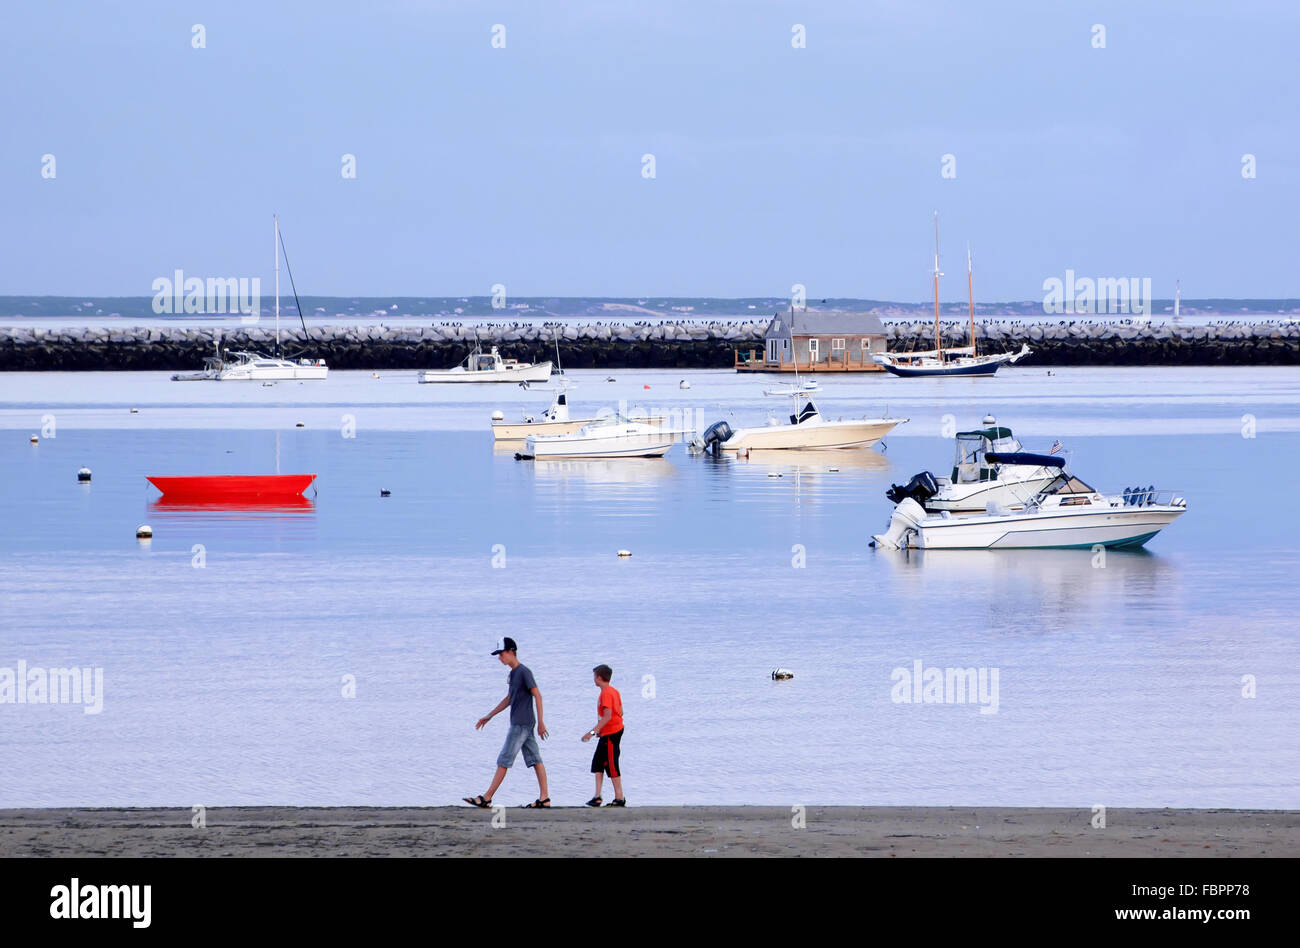 Two young boys walking past a moored red dory, motorboats, and sailboats at Provincetown Harbor at sunset. Stock Photo